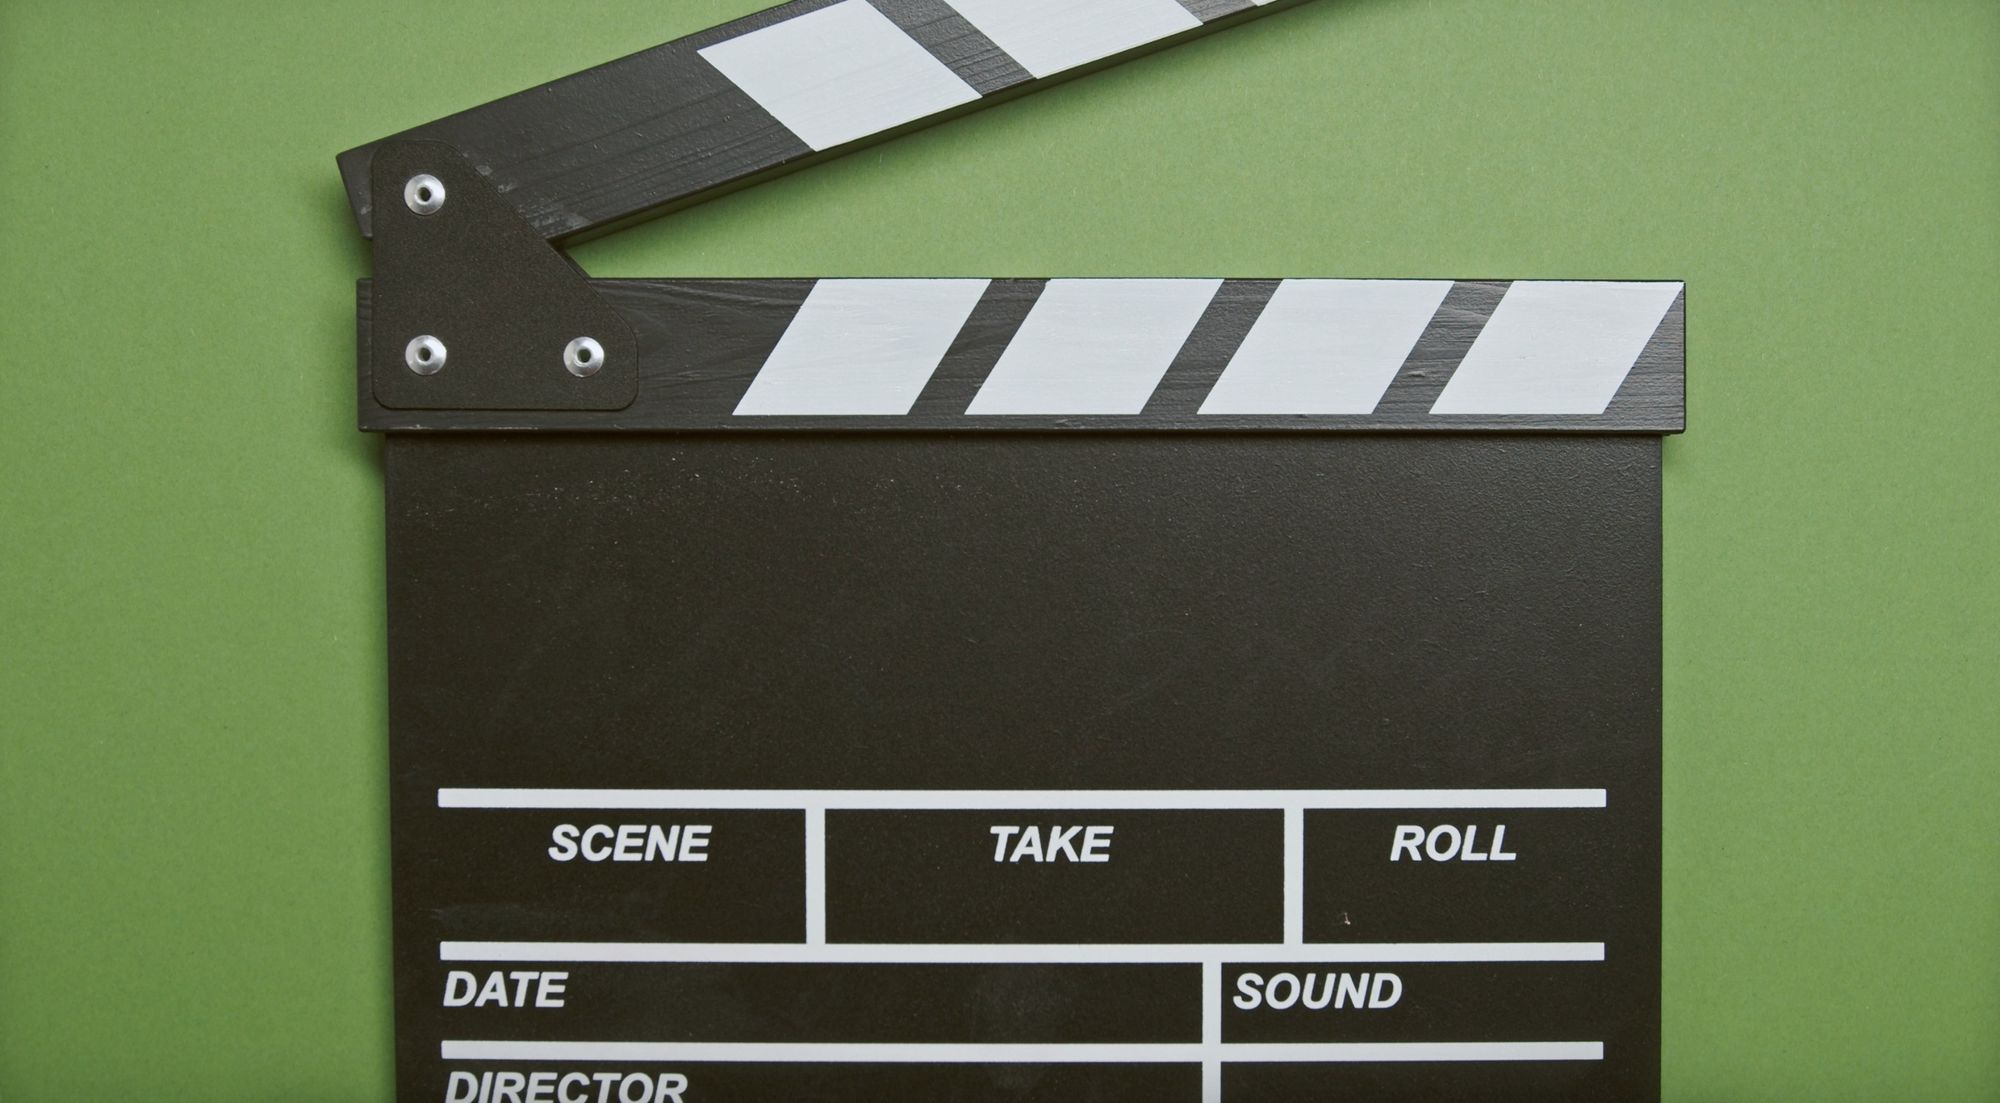 The Impact of Covid-19 on the Film Industry